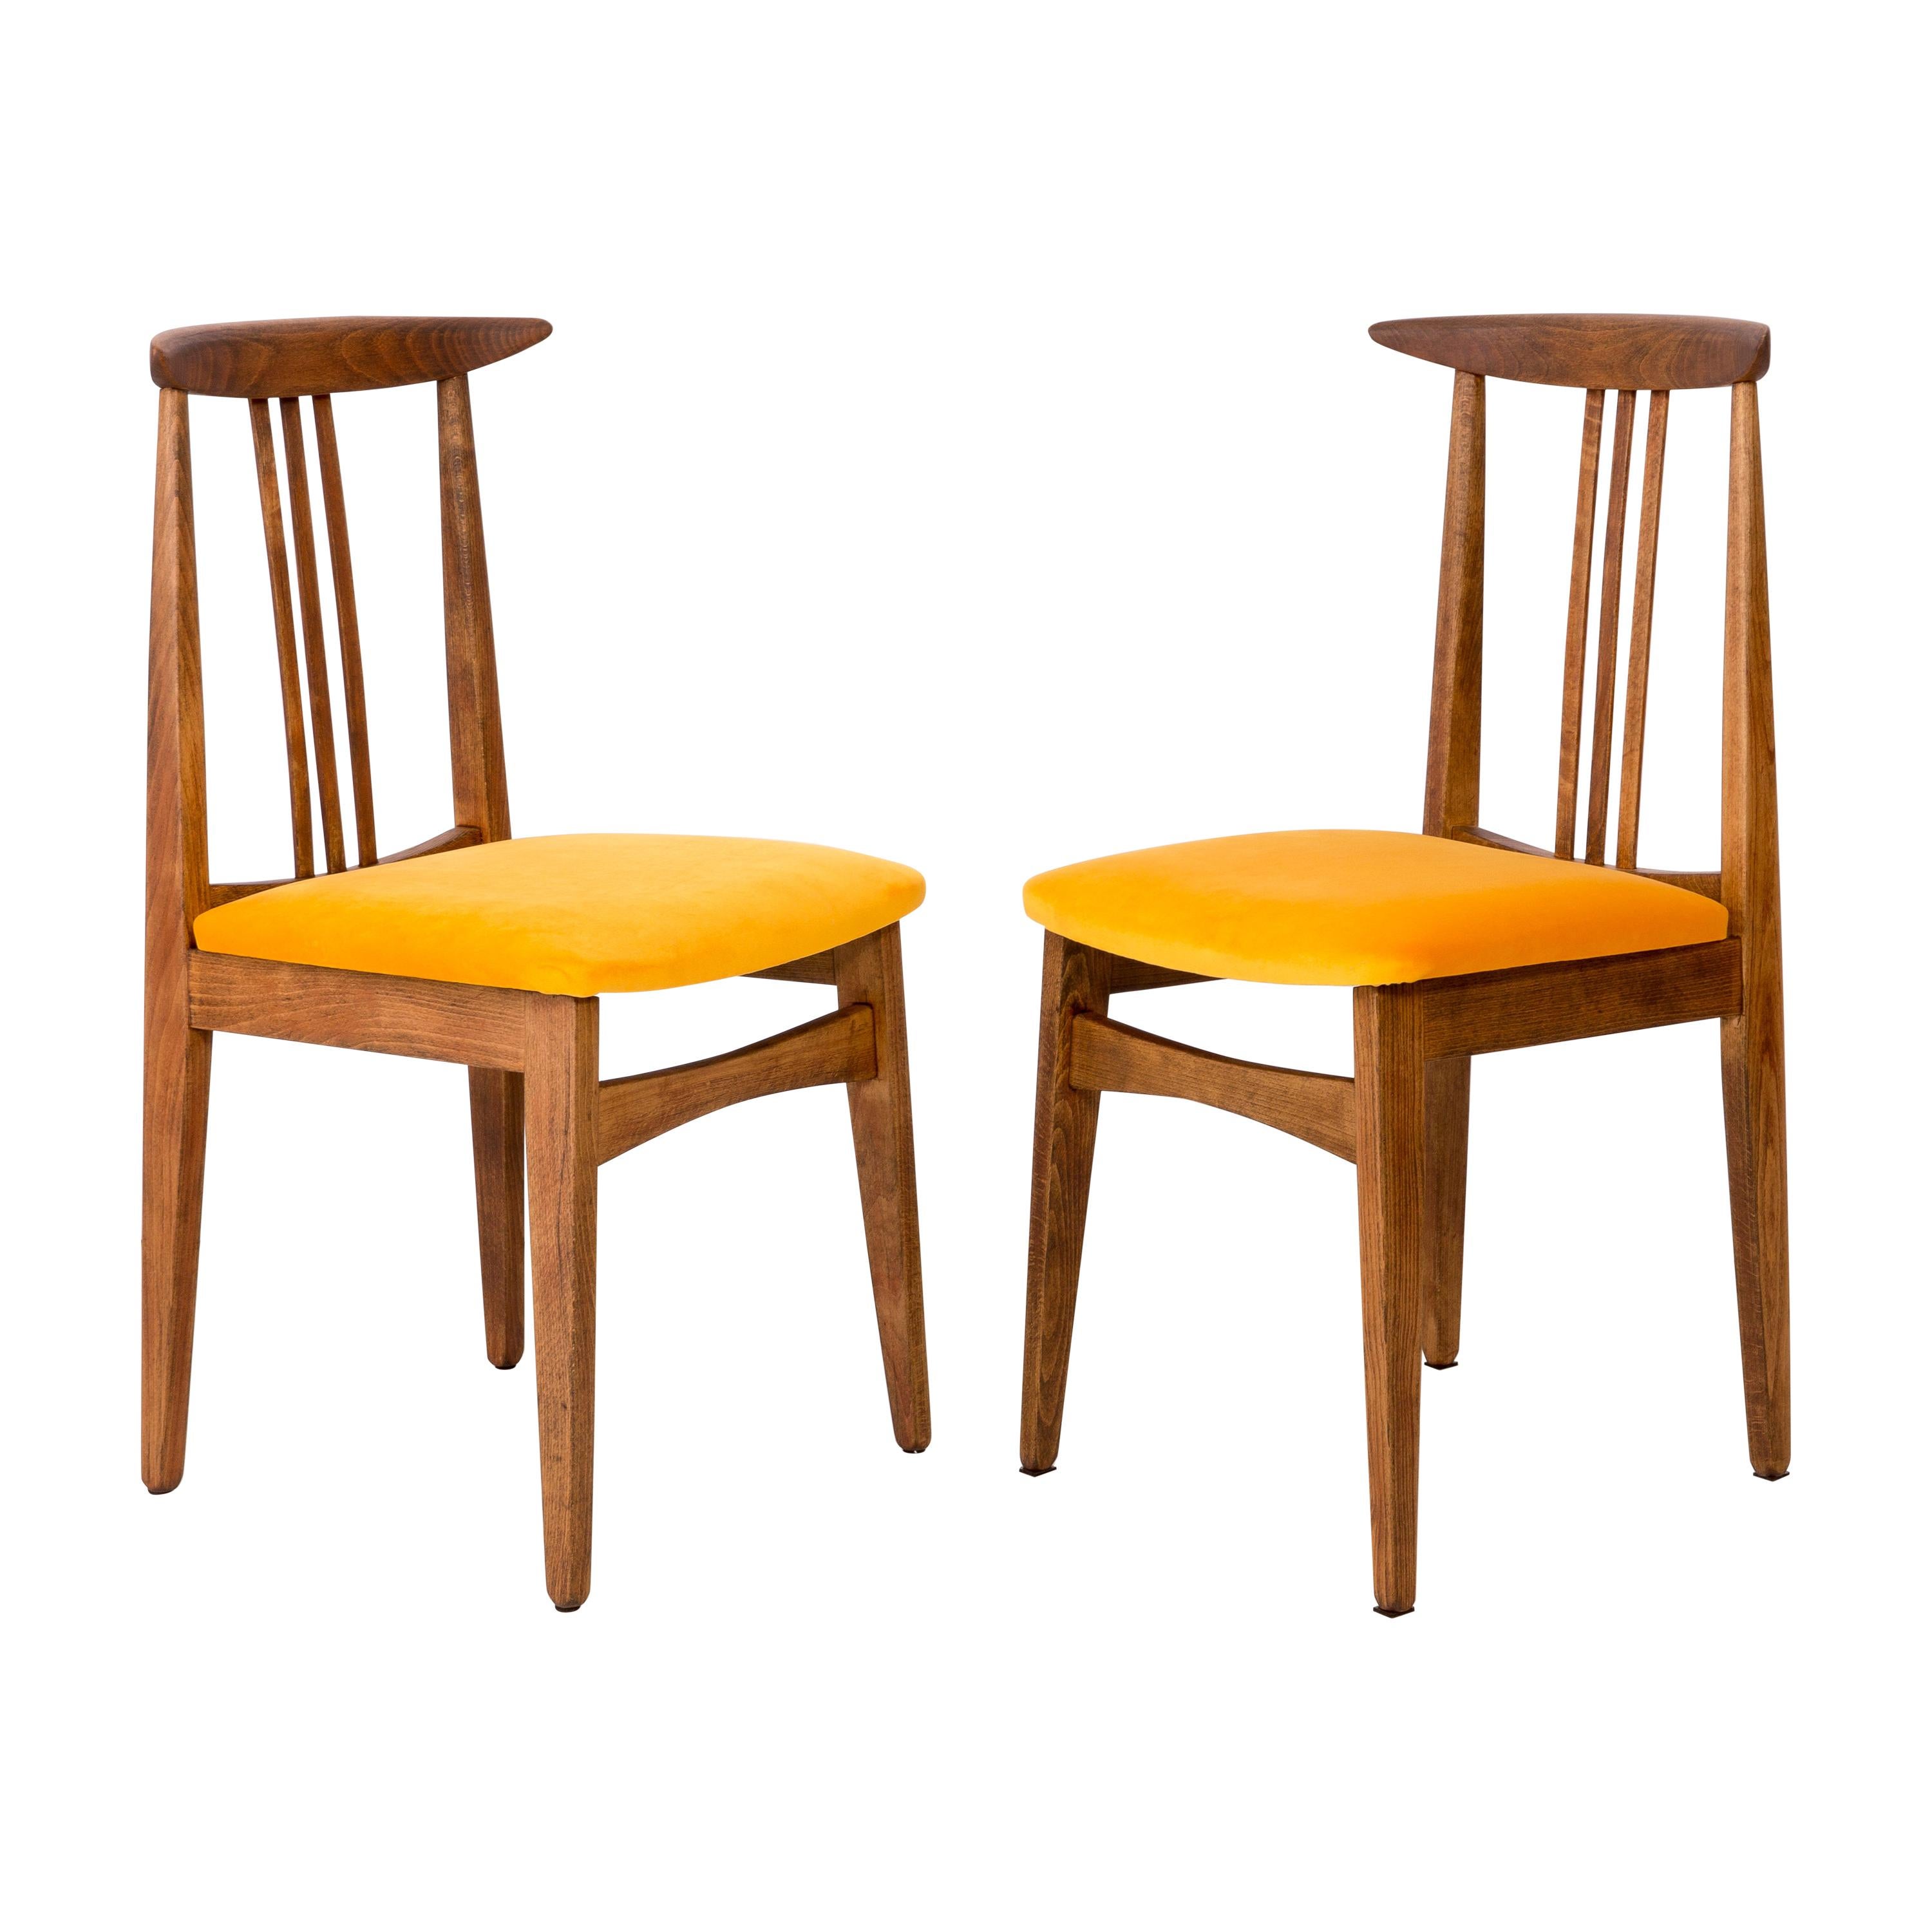 Set of Two Yellow Chairs, by Zielinski, Poland, 1960s